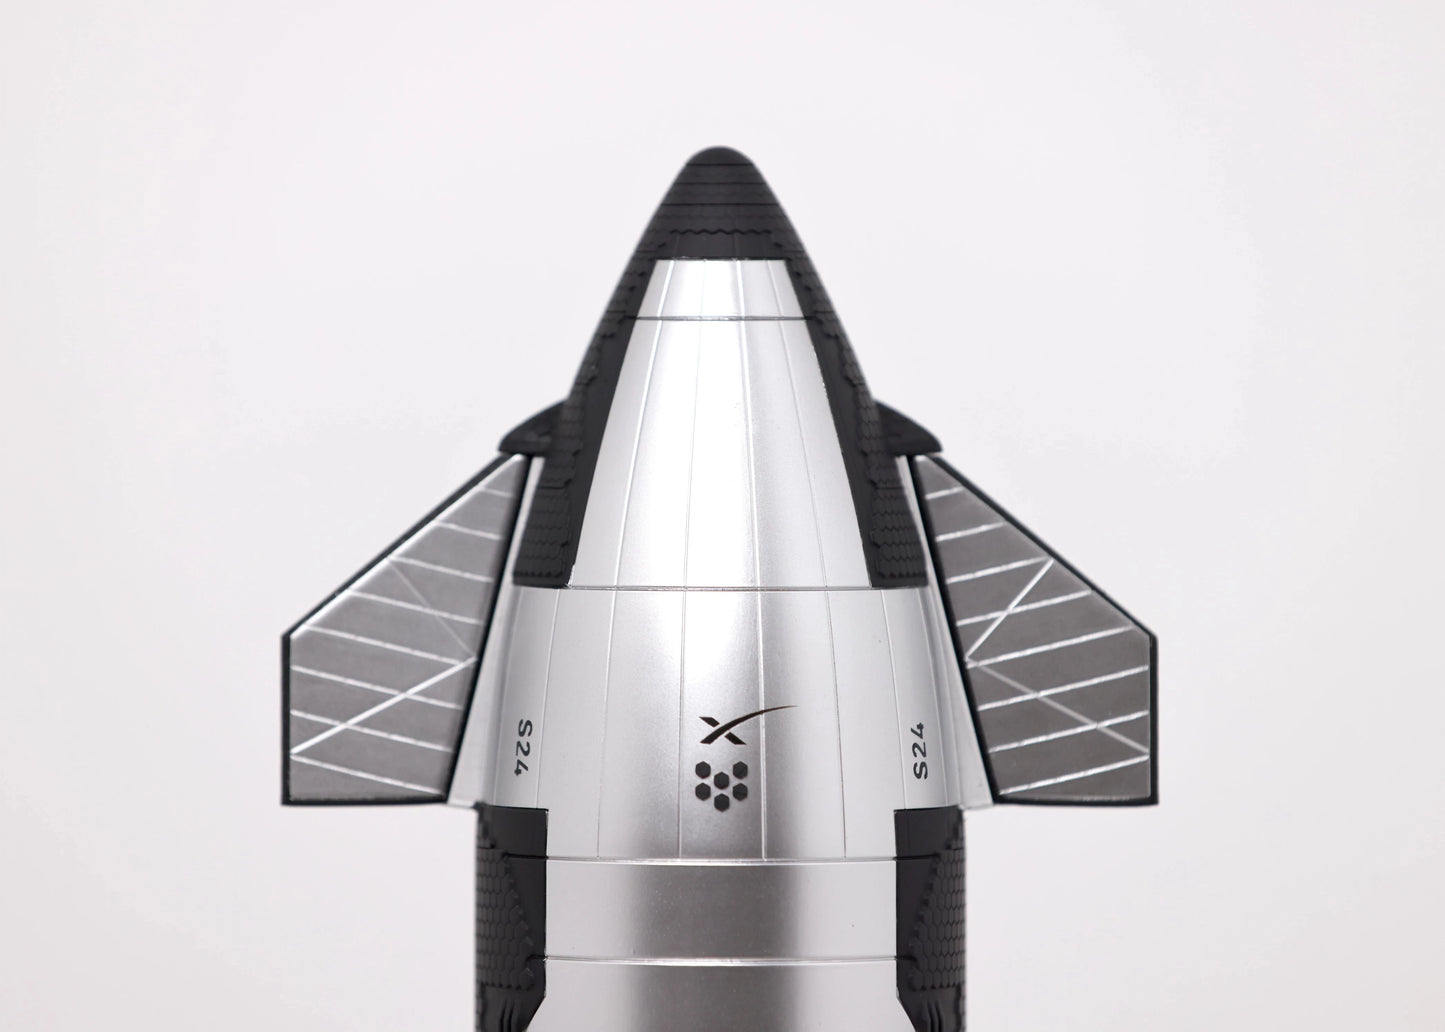 Demonstration of the upper part with the Starship SN 24 logo in front view